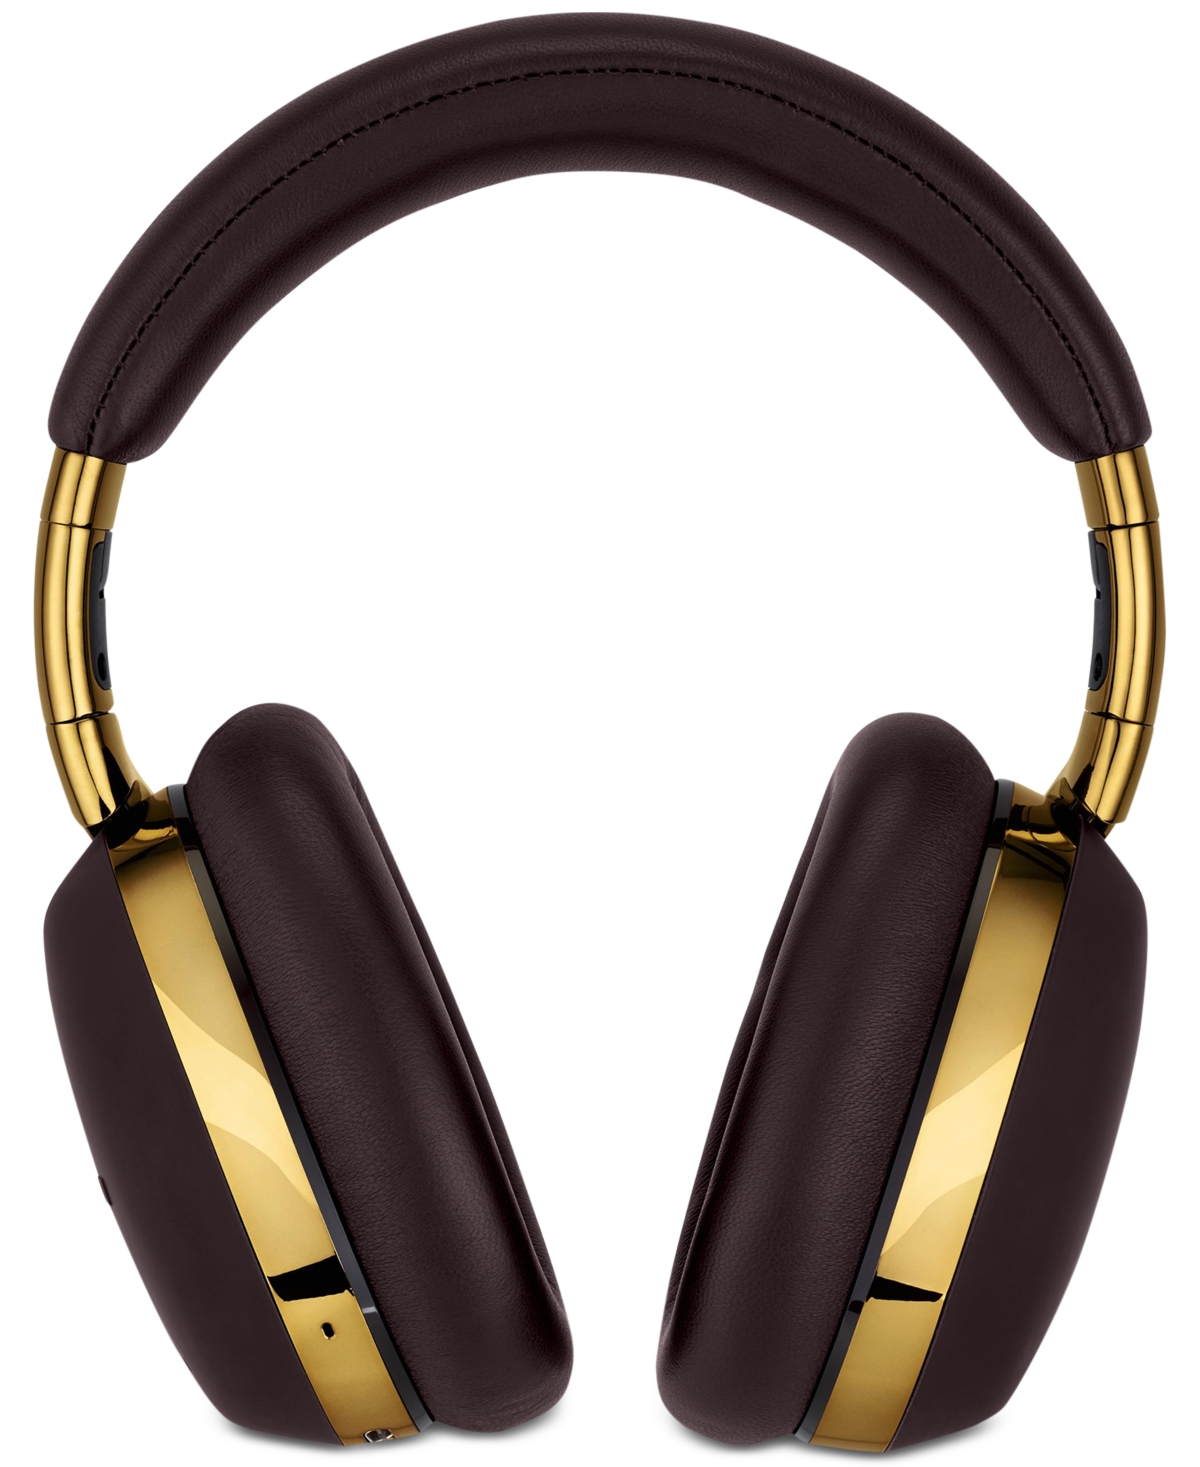 Montblanc Mb 01 Over-ear Headphones In Brown